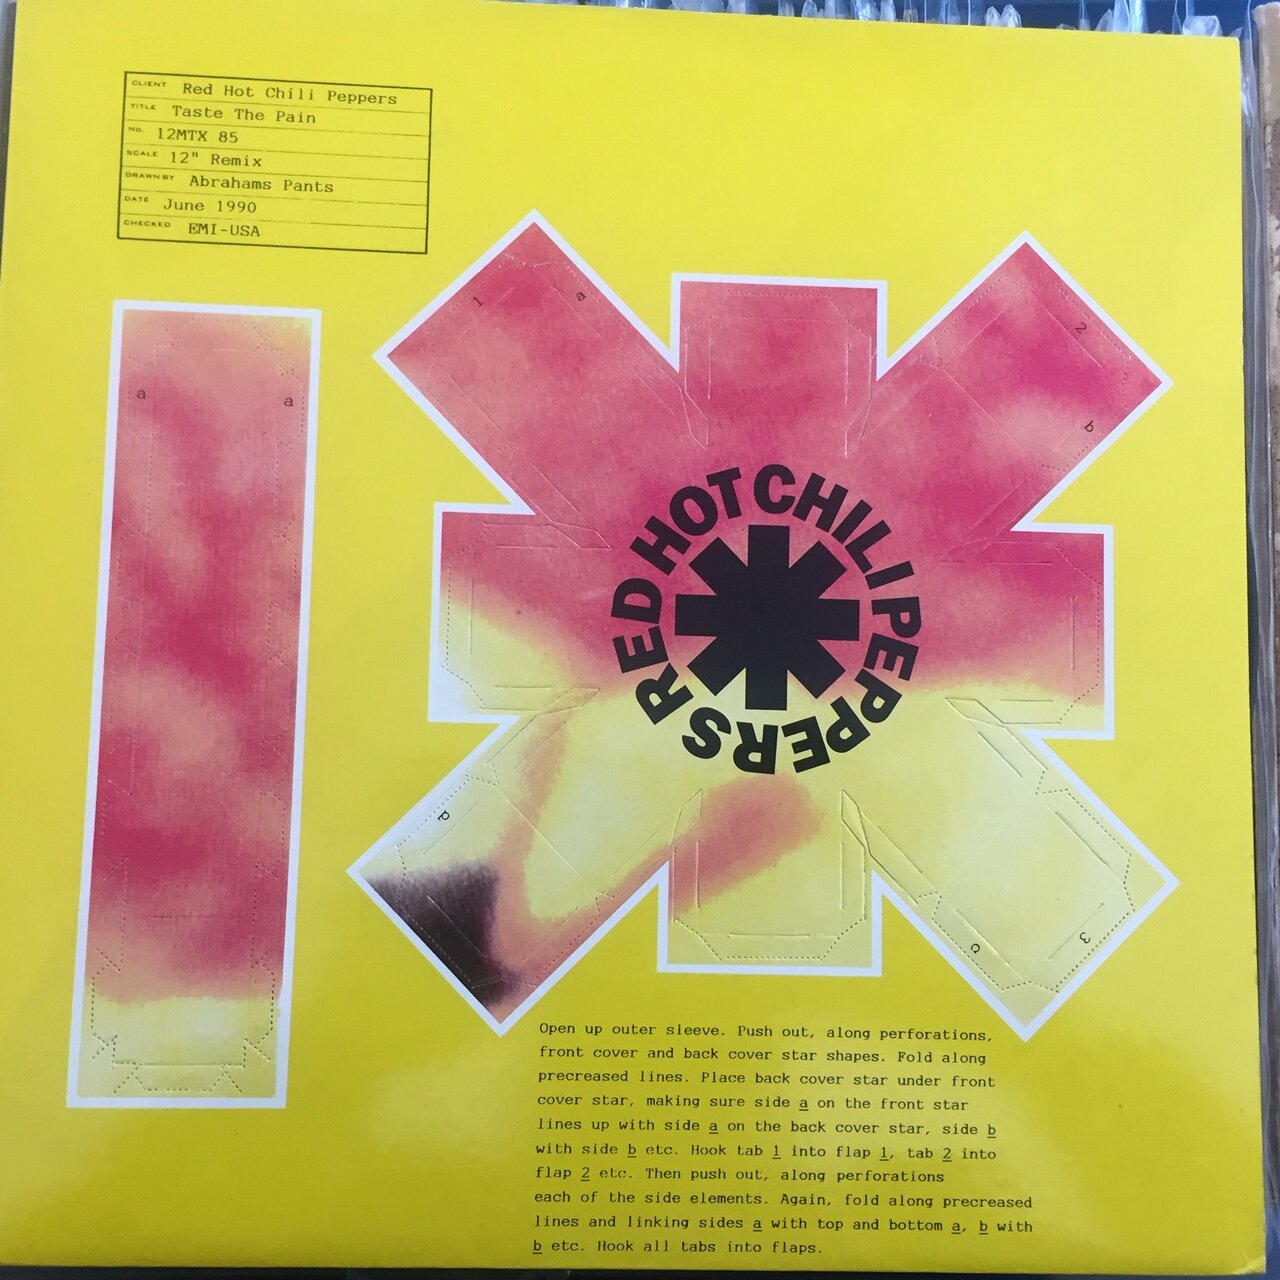 Red Hot Chili Peppers Taste the Pain Fold out pop up cover 12